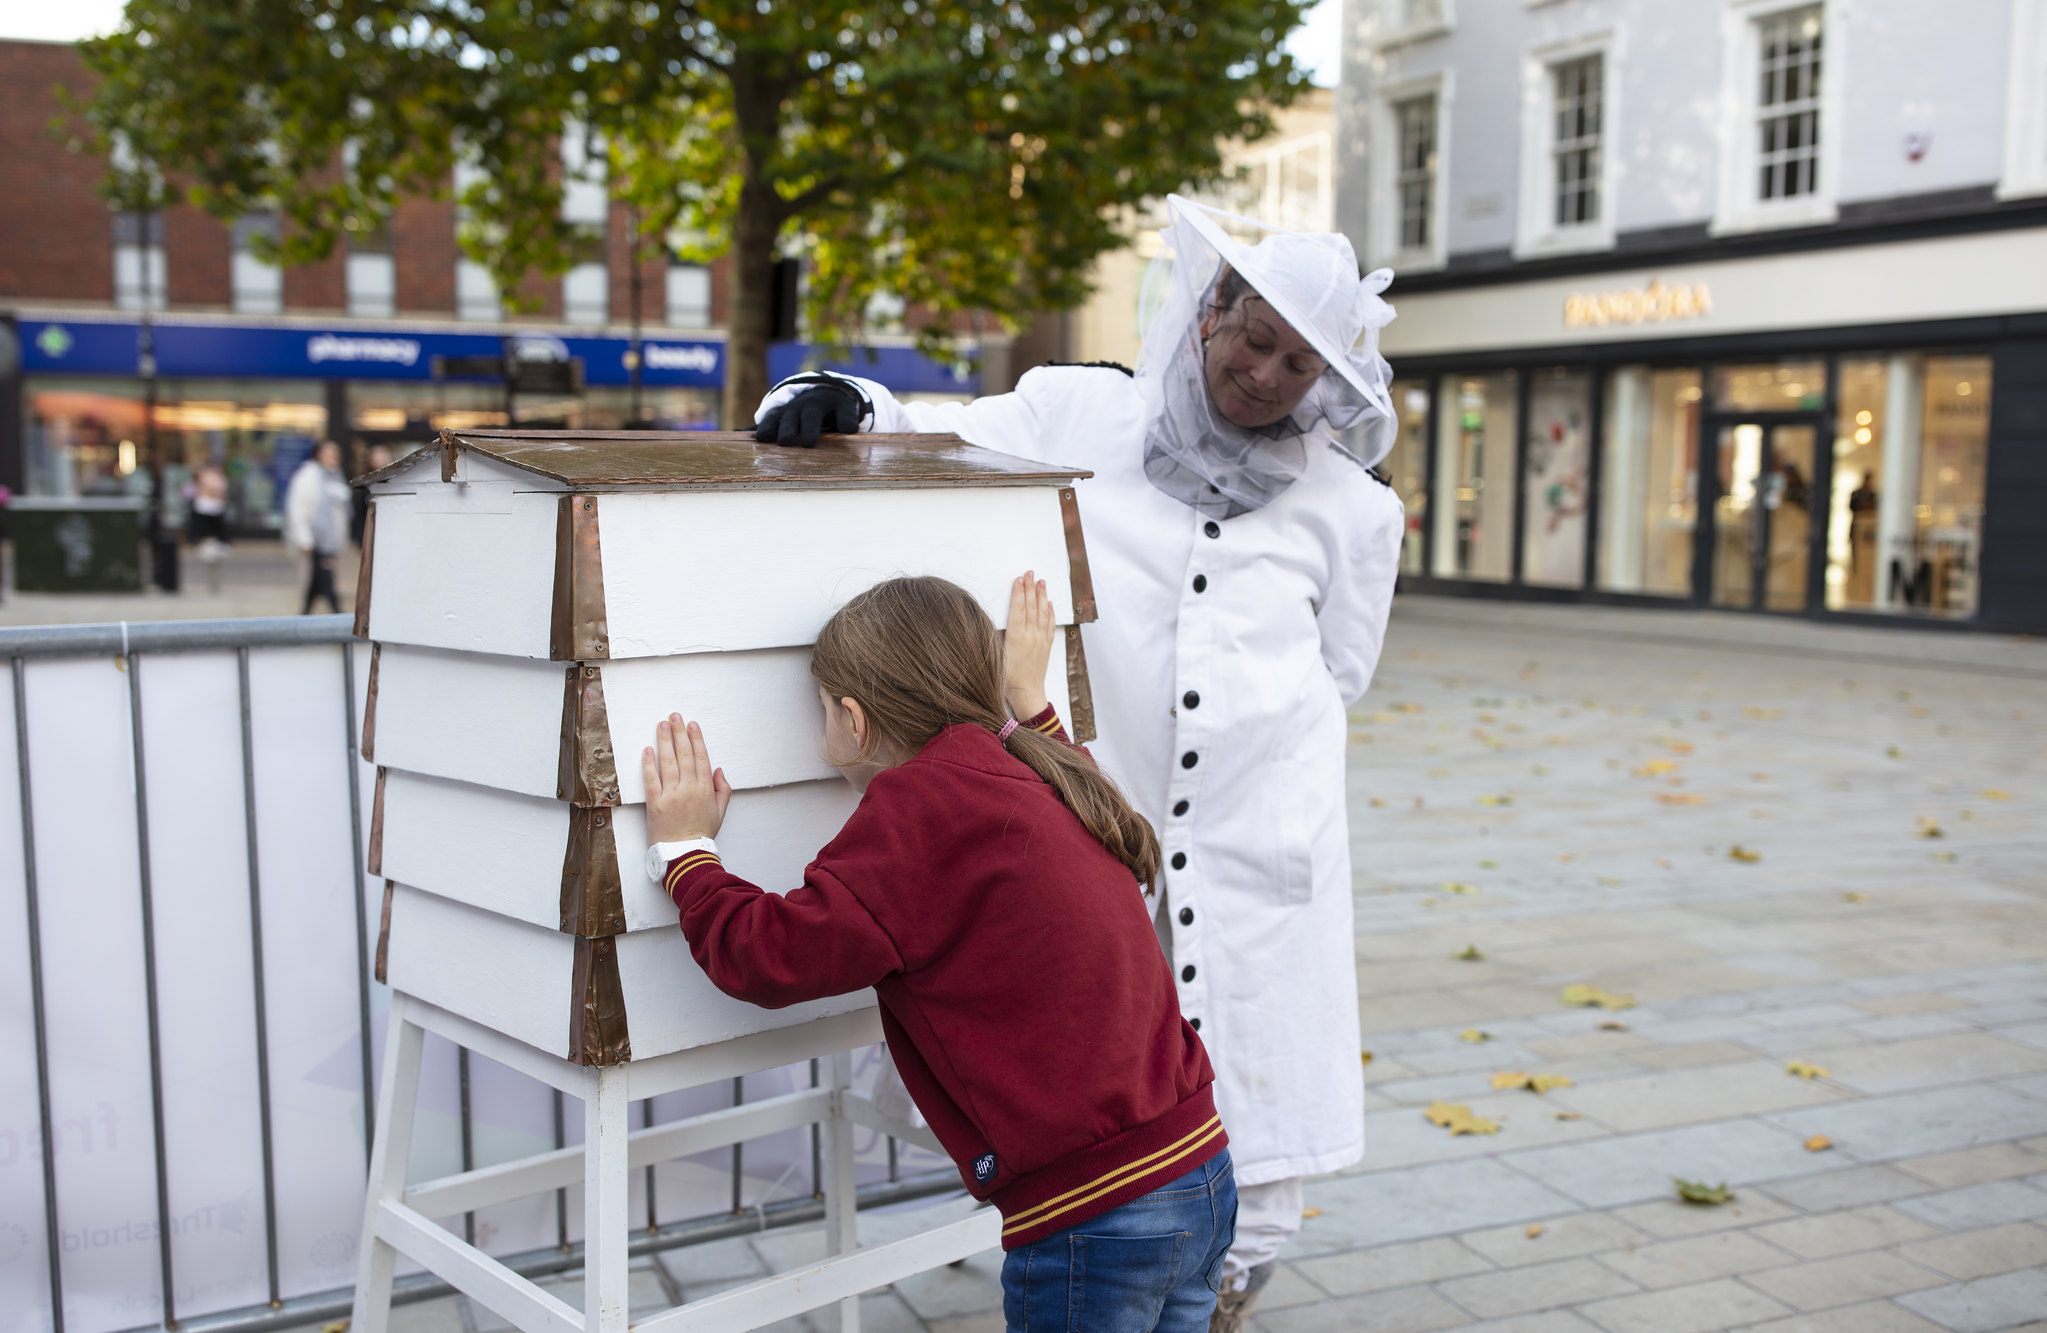 A colony of bees on Lincoln high street